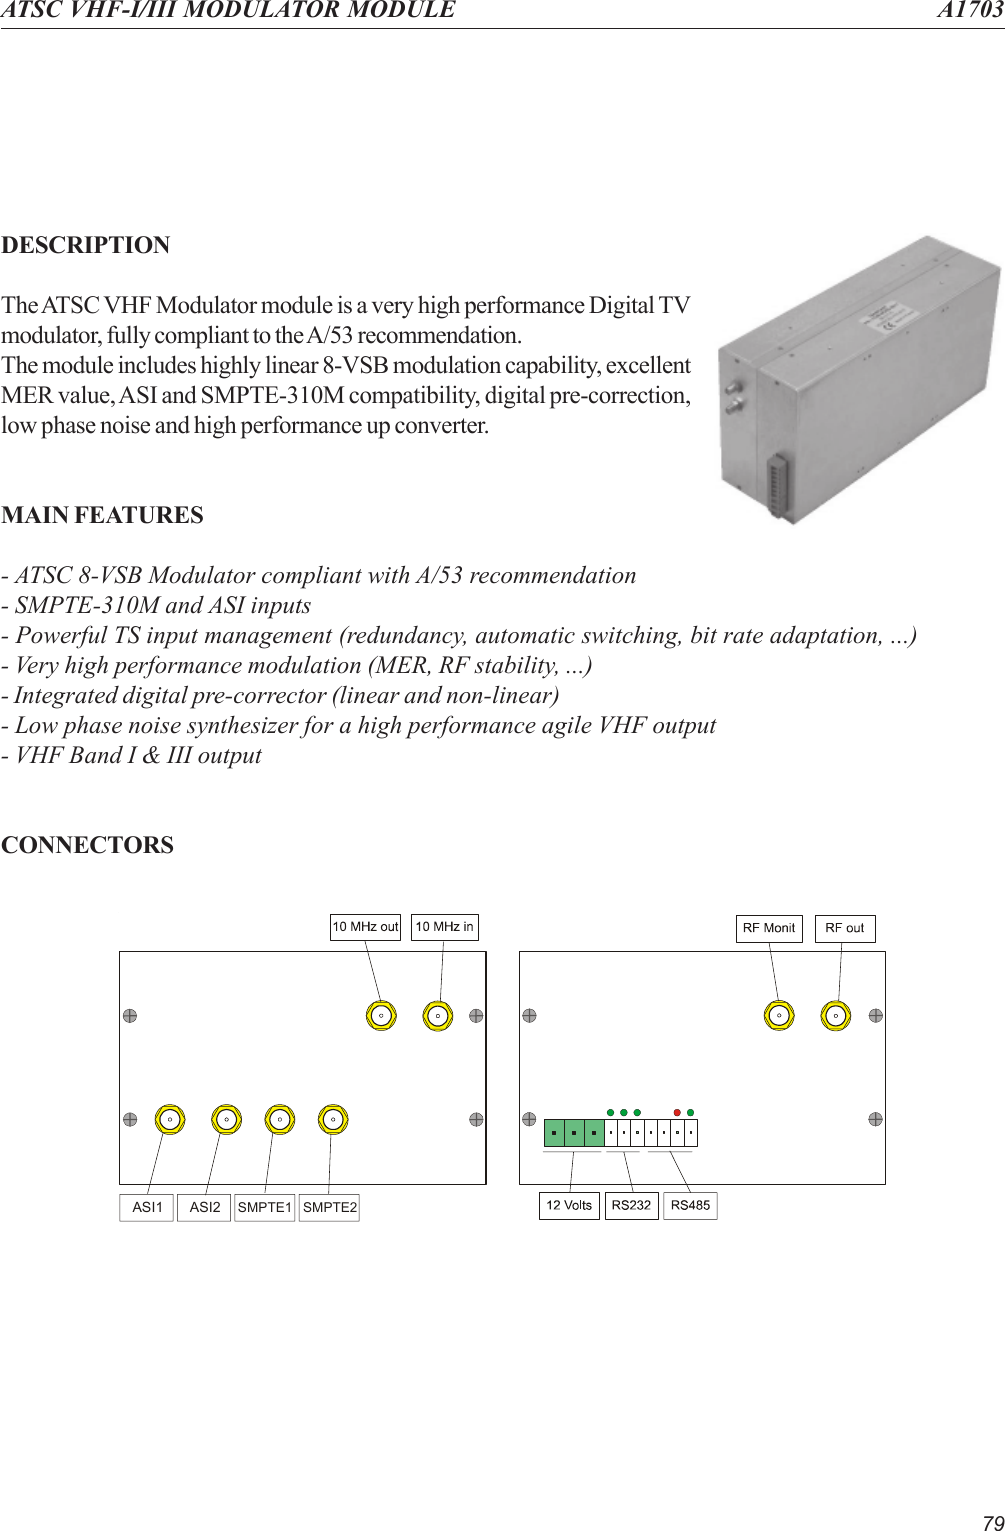 79ATSC VHF-I/III MODULATOR MODULE A1703DESCRIPTIONThe ATSC VHF Modulator module is a very high performance Digital TVmodulator, fully compliant to the A/53 recommendation.The module includes highly linear 8-VSB modulation capability, excellentMER value, ASI and SMPTE-310M compatibility, digital pre-correction,low phase noise and high performance up converter.MAIN FEATURES- ATSC 8-VSB Modulator compliant with A/53 recommendation- SMPTE-310M and ASI inputs- Powerful TS input management (redundancy, automatic switching, bit rate adaptation, ...)- Very high performance modulation (MER, RF stability, ...)- Integrated digital pre-corrector (linear and non-linear)- Low phase noise synthesizer for a high performance agile VHF output- VHF Band I &amp; III outputCONNECTORSASI1 ASI2SMPTE1 SMPTE2